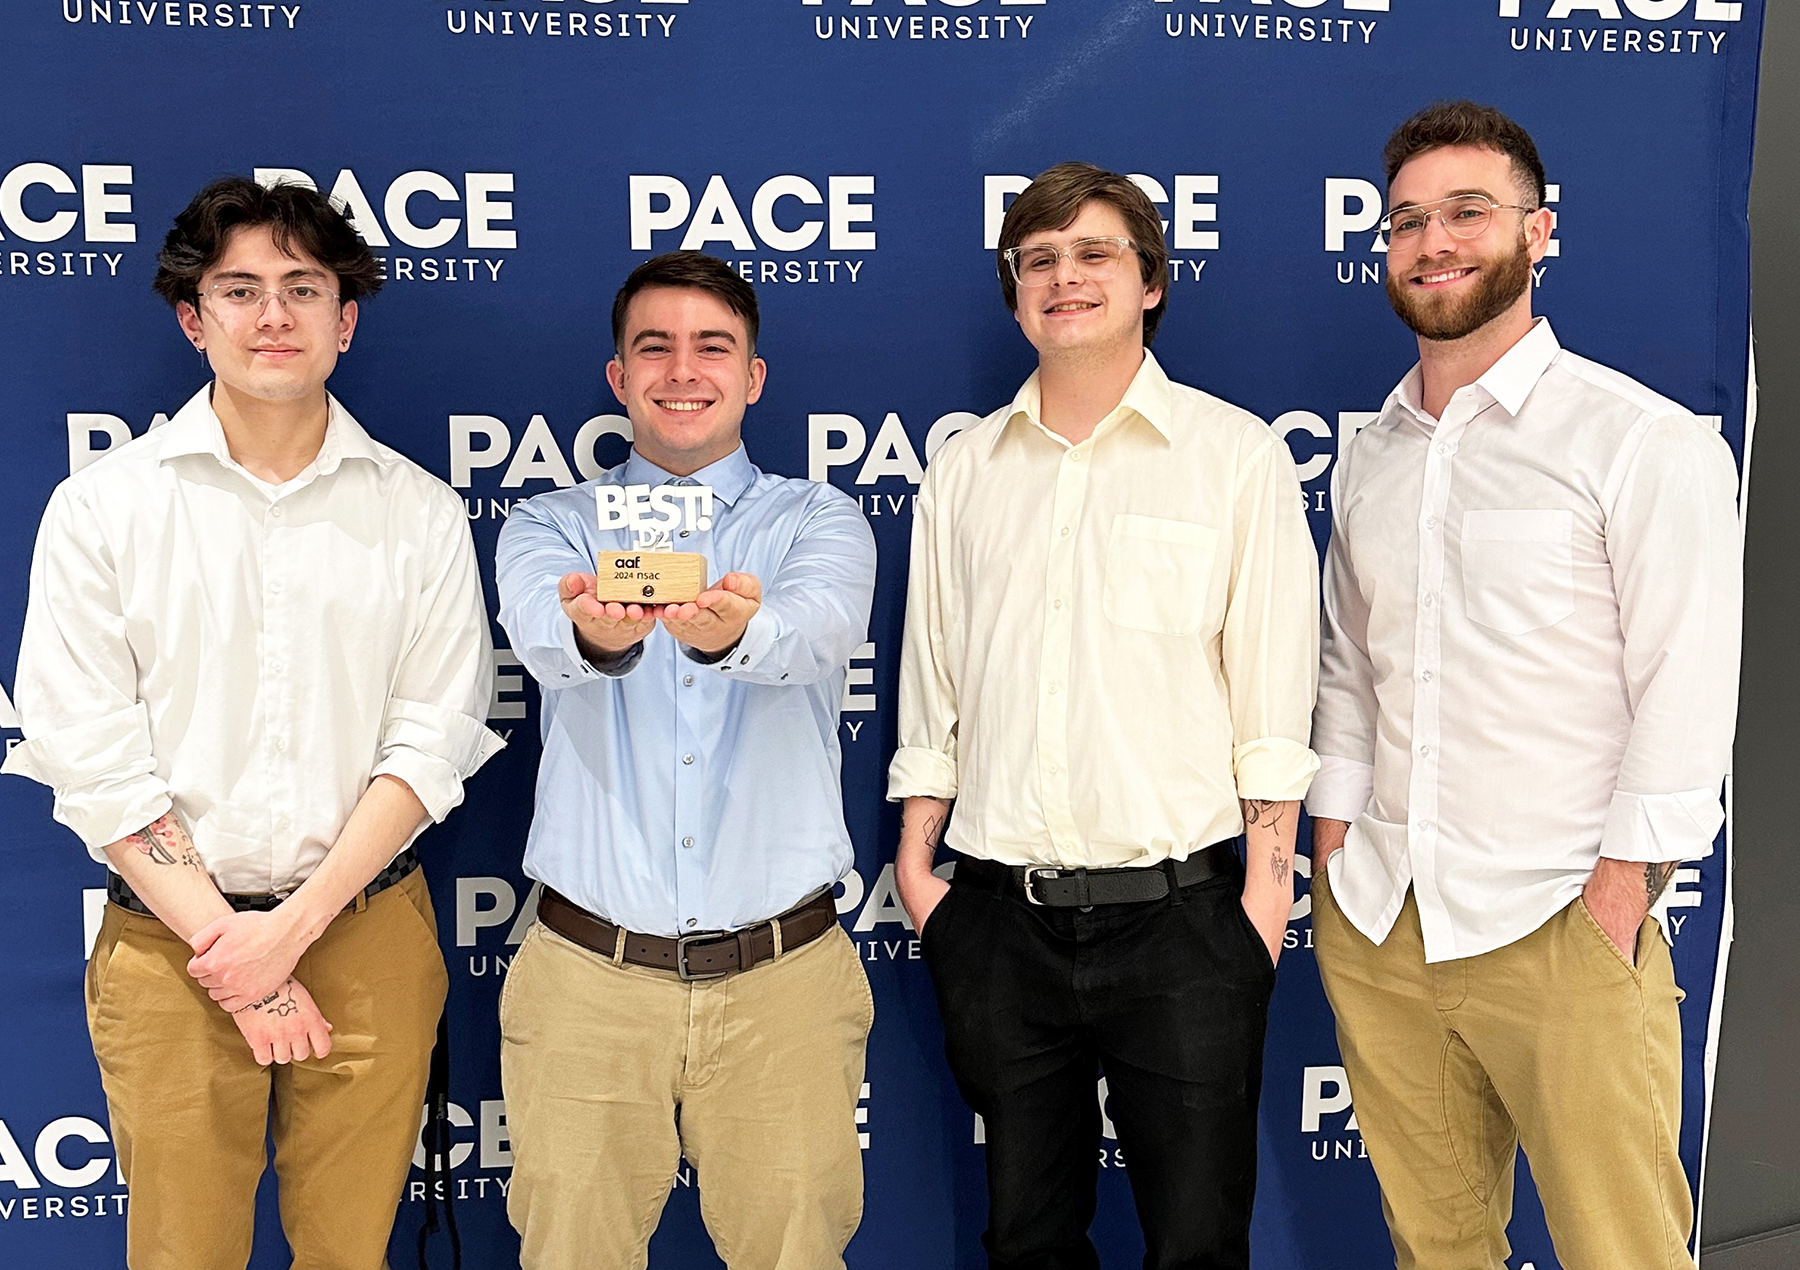 four advertising and public relations students stand together at the conference posing with their new award